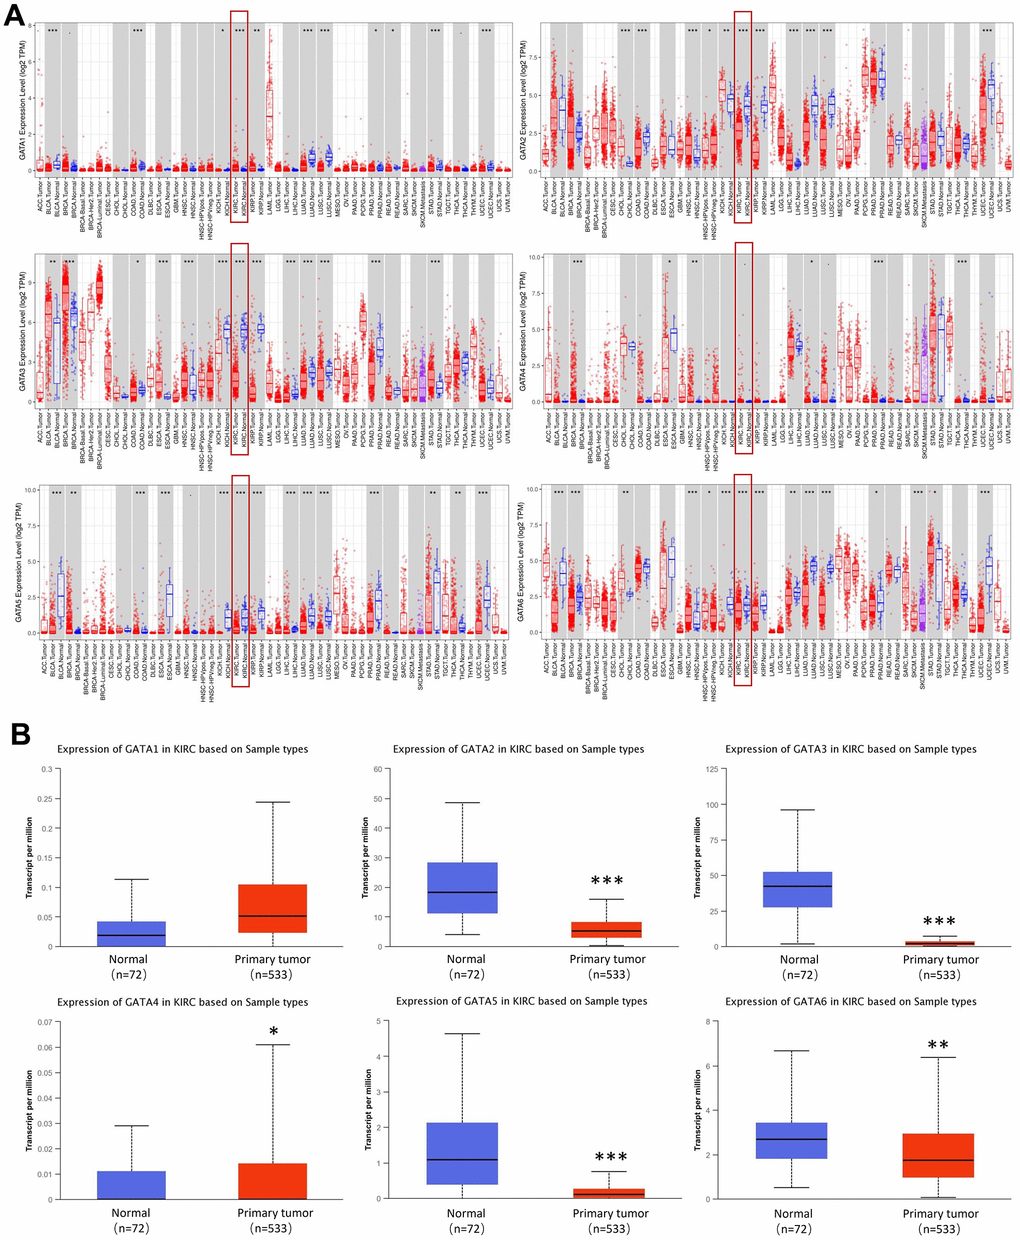 Expression levels of GATA family members in KIRC. (A) The pan-cancer expression of GATA1-6 mRNAs. (B) The expression of GATA mRNAs in KIRC. *p p p 